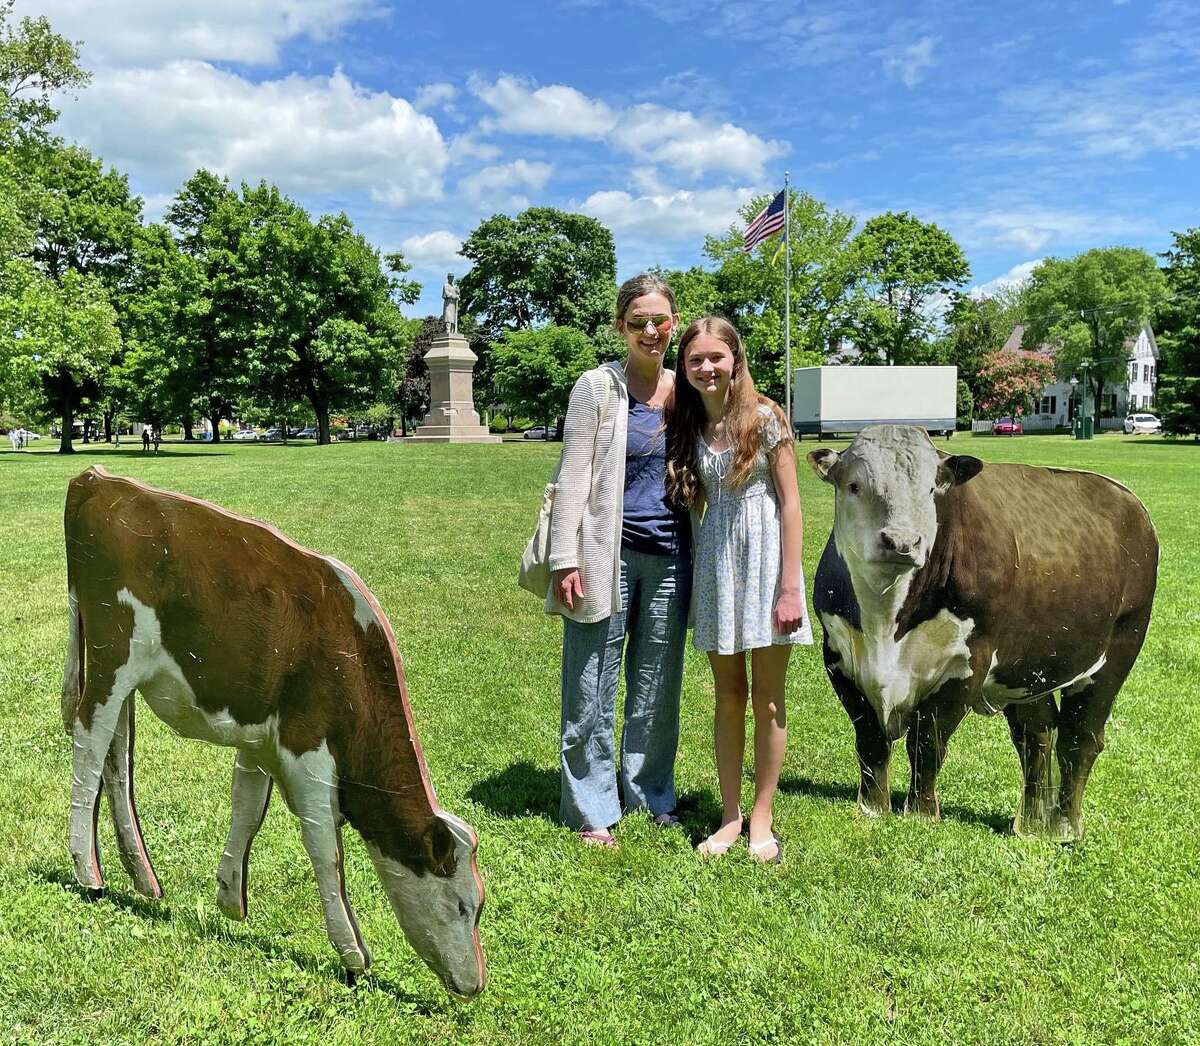 Enjoying the farm animal installation on the Guilford Green are from left, are Katie Andrus and Emma Andrus.